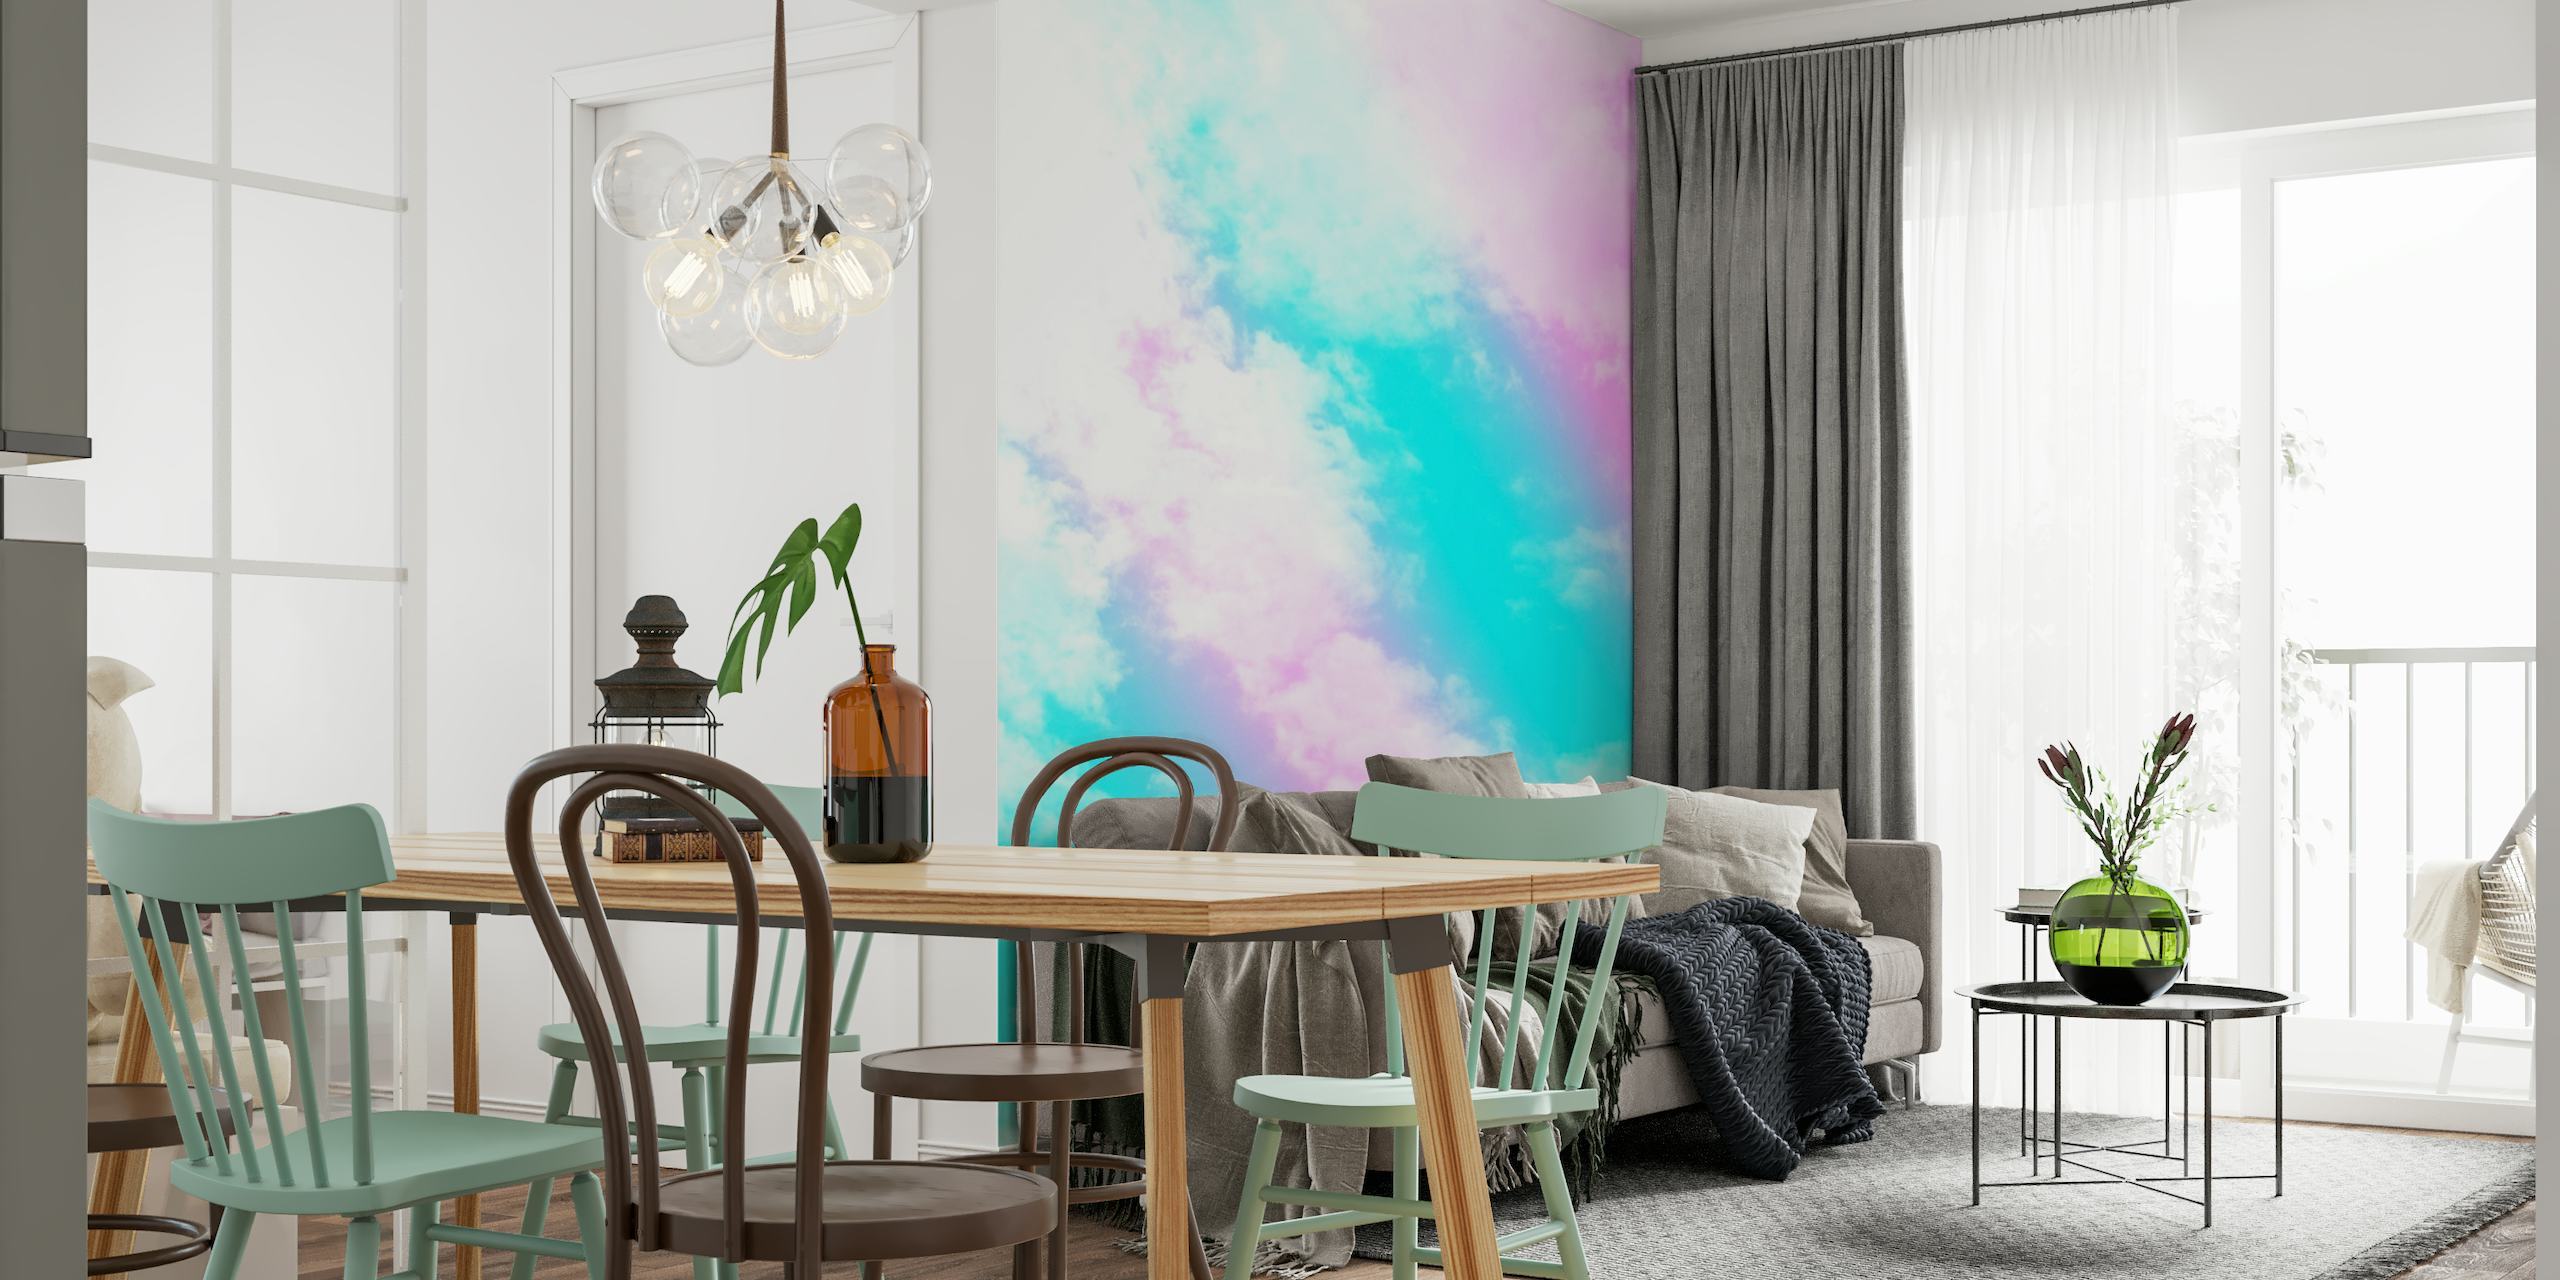 Whimsical aqua and pink cloud wall mural inviting a magical atmosphere